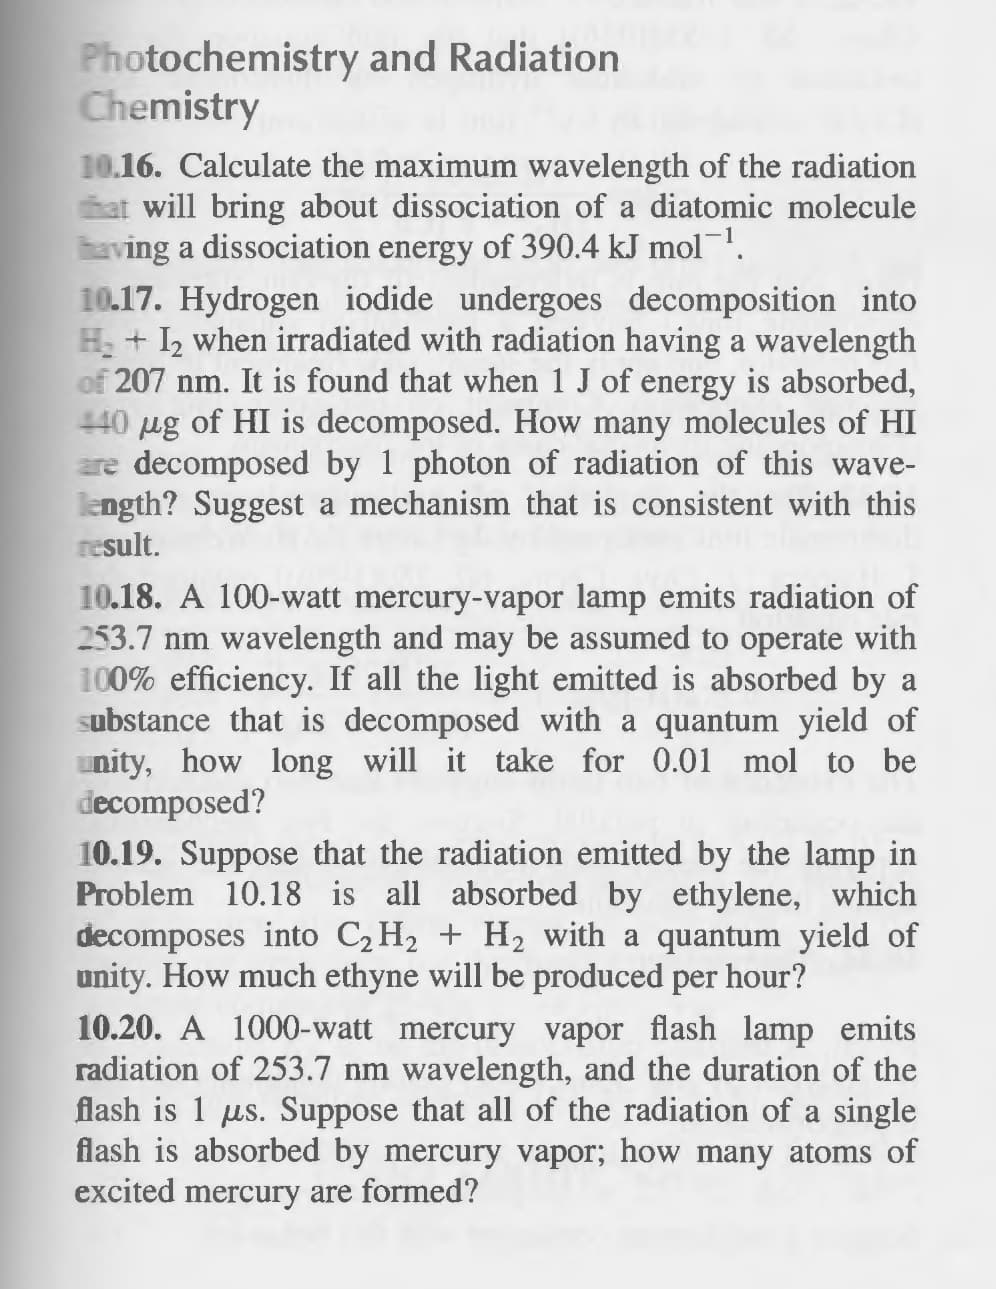 Photochemistry and Radiation
Chemistry
10.16. Calculate the maximum wavelength of the radiation
at will bring about dissociation of a diatomic molecule
having a dissociation energy of 390.4 kJ mol¹.
10.17. Hydrogen iodide undergoes decomposition into
H₂ + 1₂ when irradiated with radiation having a wavelength
of 207 nm. It is found that when 1 J of energy is absorbed,
440 μg of HI is decomposed. How many molecules of HI
are decomposed by 1 photon of rad tion
this wave-
length? Suggest a mechanism that is consistent with this
result.
10.18. A 100-watt mercury-vapor lamp emits radiation of
253.7 nm wavelength and may be assumed to operate with
100% efficiency. If all the light emitted is absorbed by a
substance that is decomposed with a quantum yield of
nity, how long will it take for 0.01 mol to be
decomposed?
10.19. Suppose that the radiation emitted by the lamp in
Problem 10.18 is all absorbed by ethylene, which
decomposes into C₂ H₂ + H₂ with a quantum yield of
unity. How much ethyne will be produced per hour?
10.20. A 1000-watt mercury vapor flash lamp emits
radiation of 253.7 nm wavelength, and the duration of the
flash is 1 us. Suppose that all of the radiation of a single
flash is absorbed by mercury vapor; how many atoms of
excited mercury are formed?